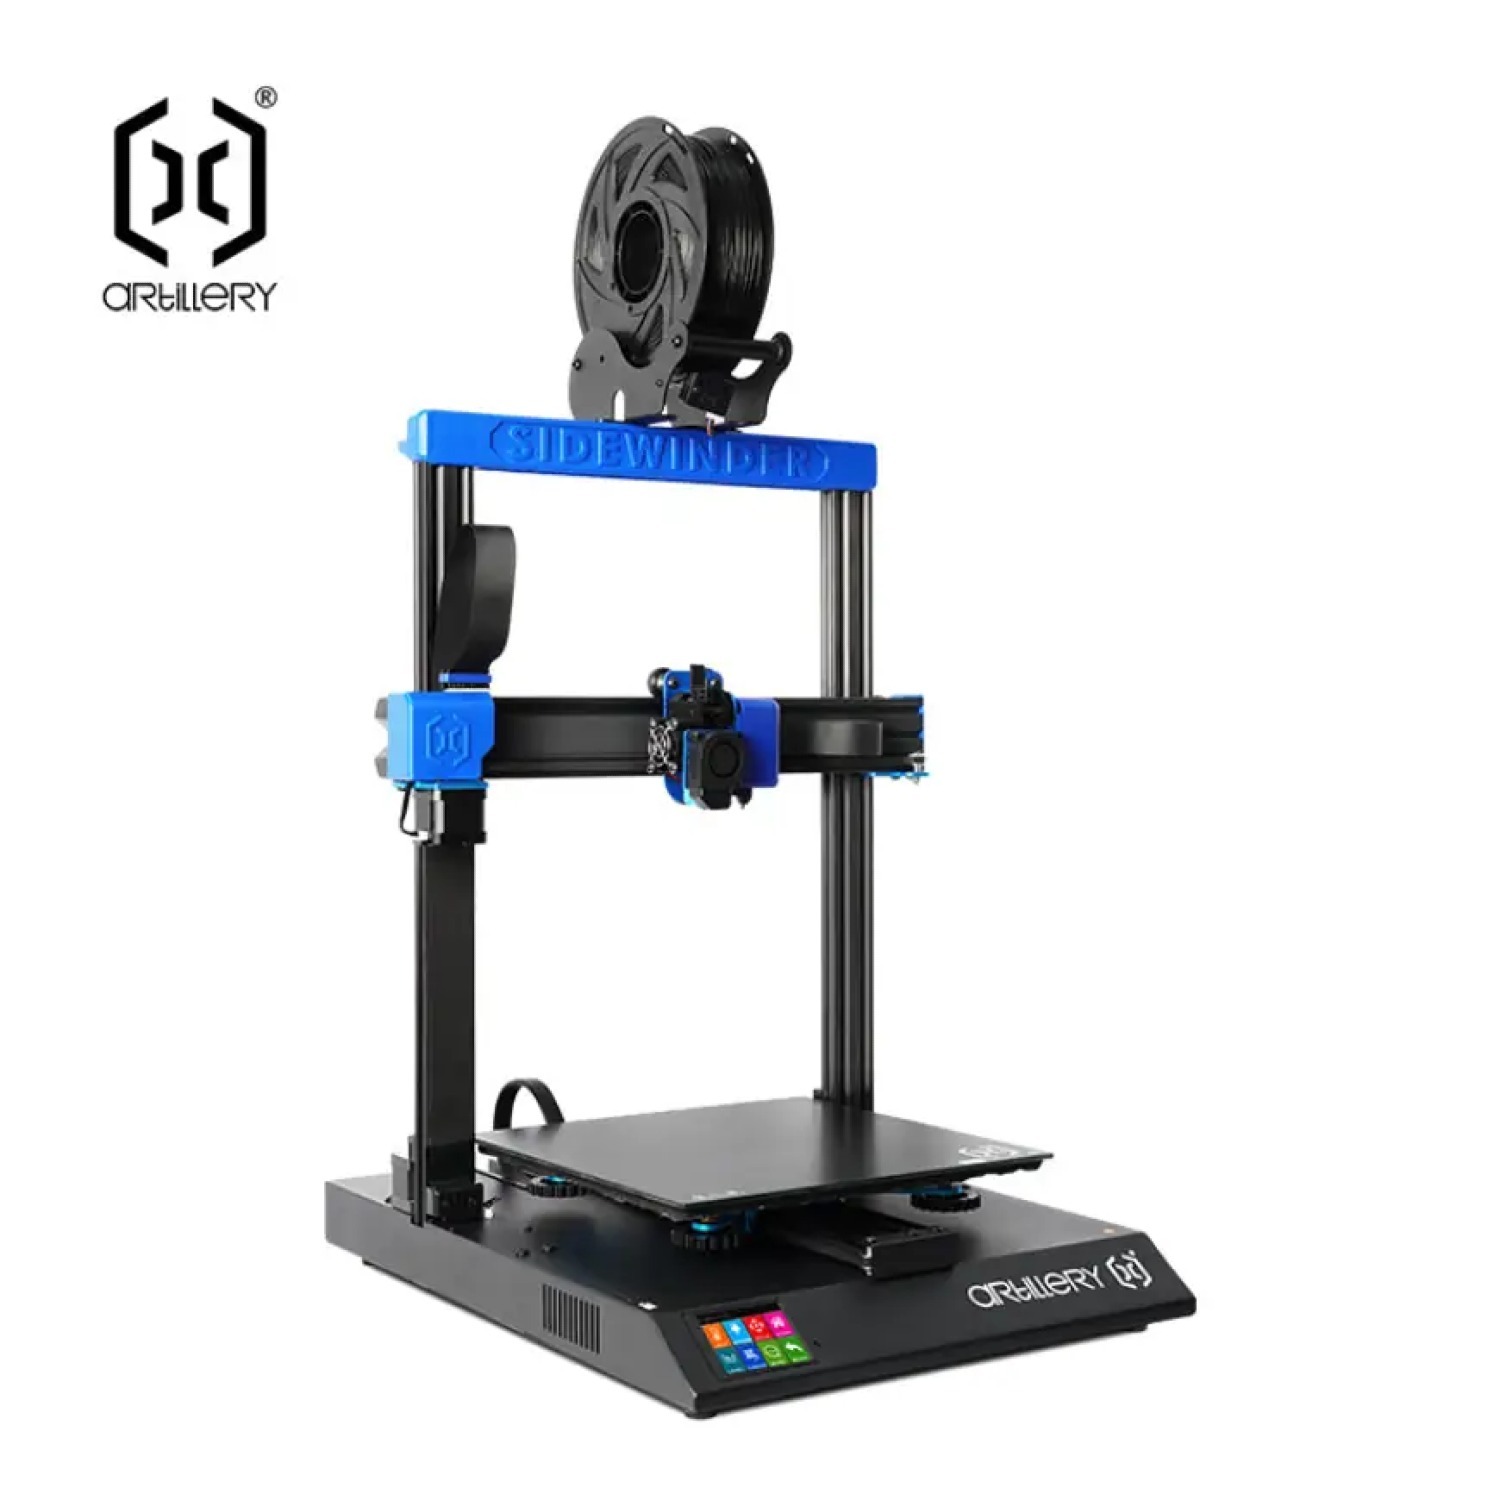 Artillery Sidewinder X2 3D Printer w/ Titan Direct Drive Extruder (300x300x400mm Printing Size) $250 and More + Free Shipping